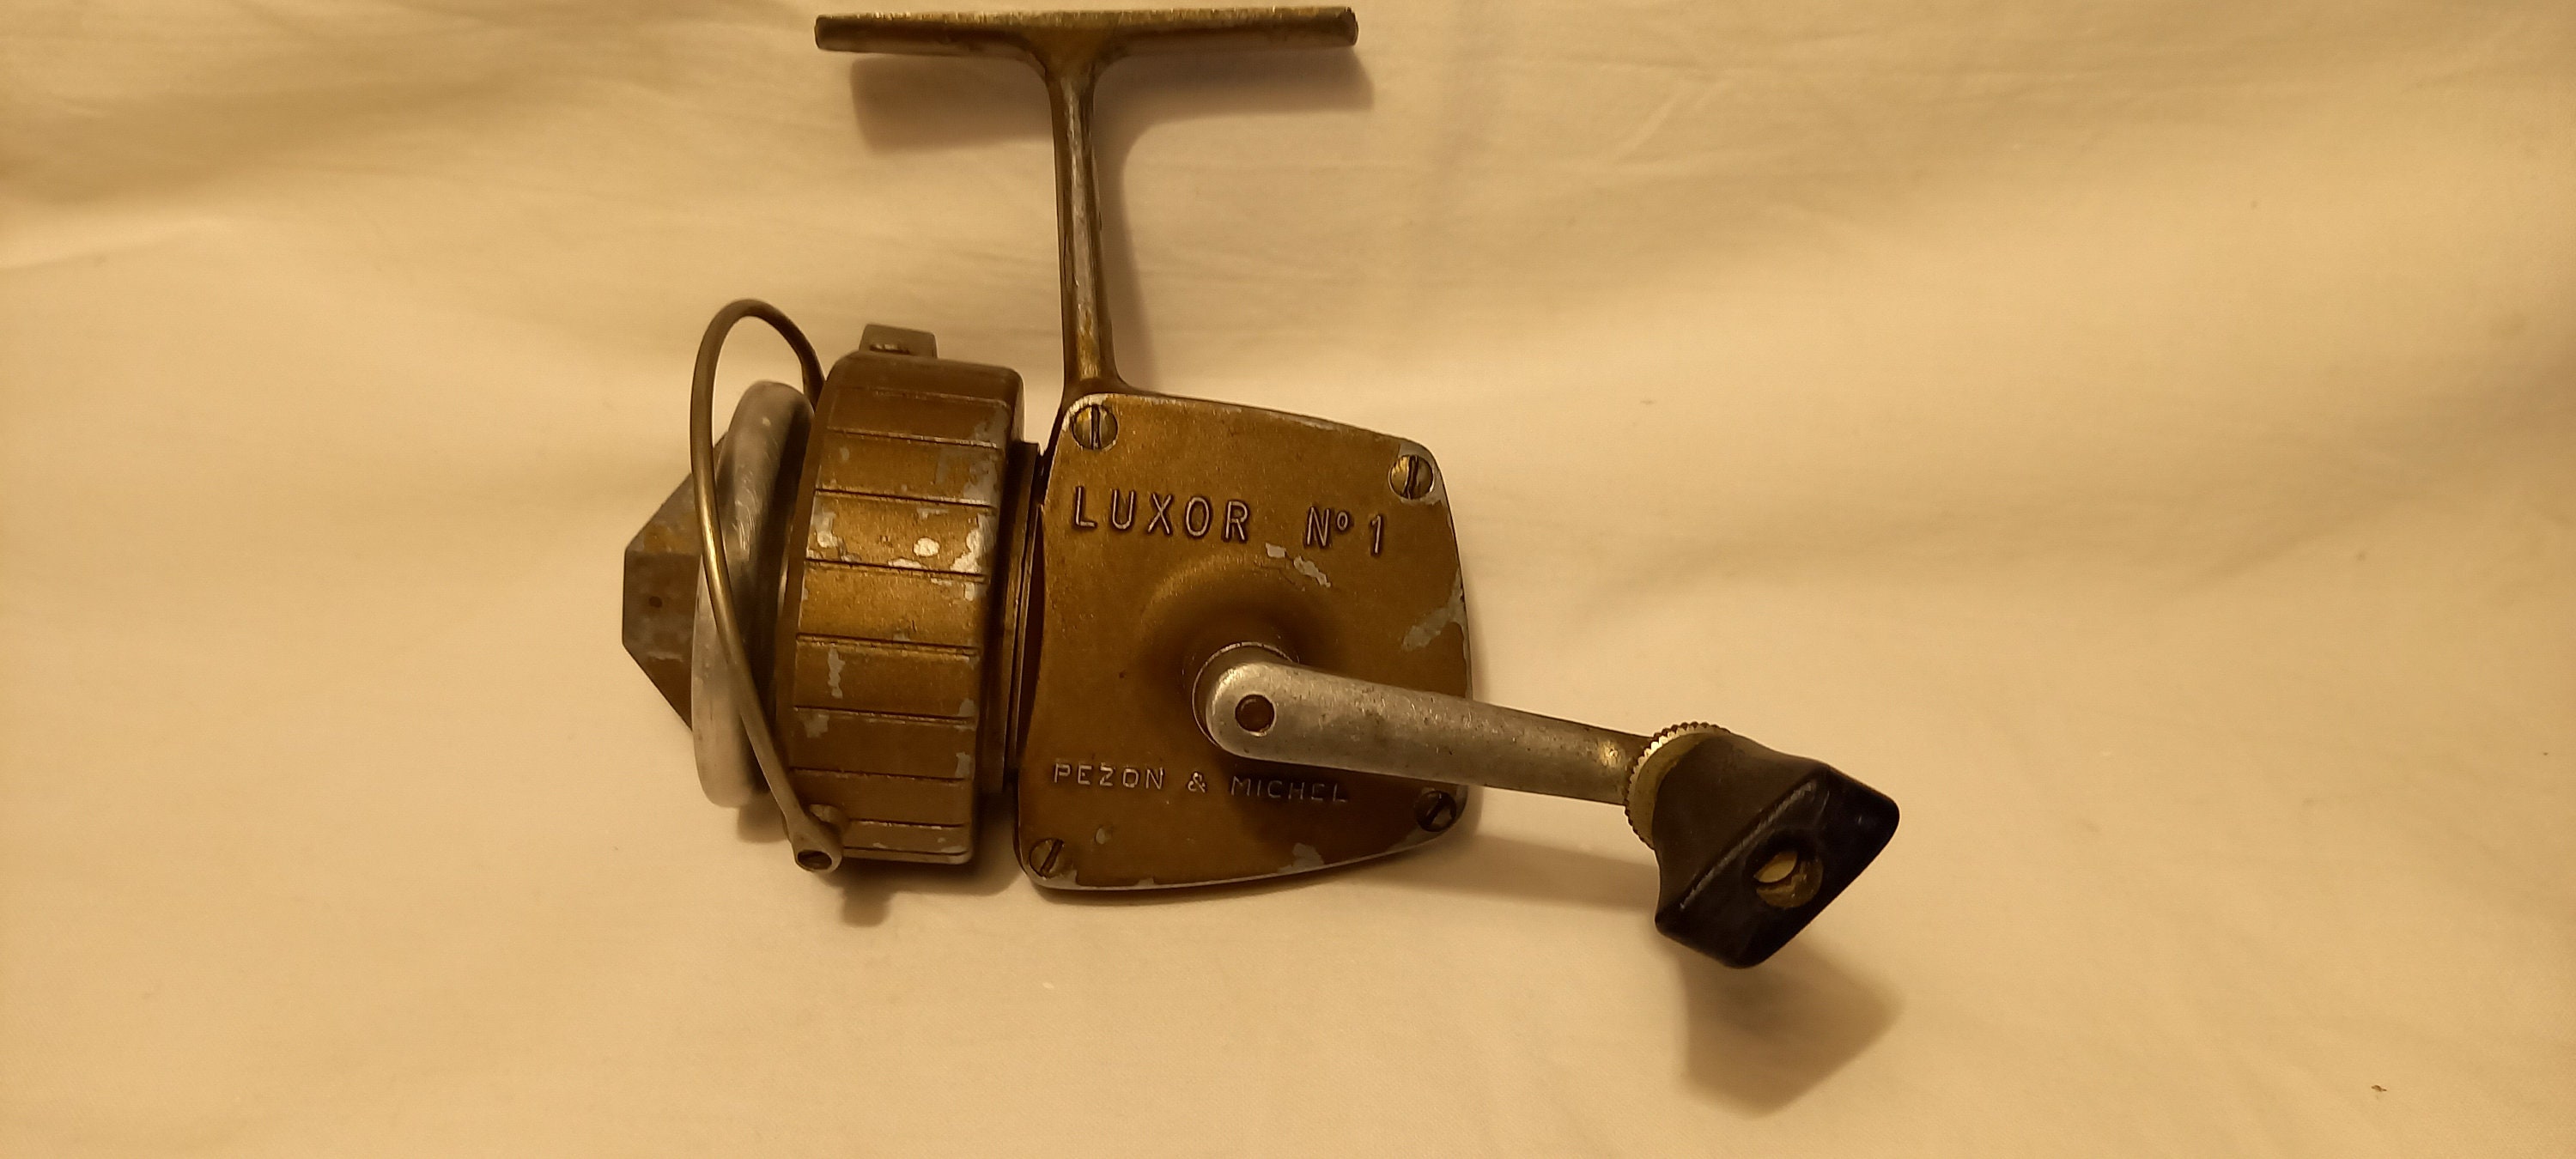 Vintage ,,LUXOR No.1 PEZON & MICHEL'' Spinning Spin Fishing Reel -   Canada